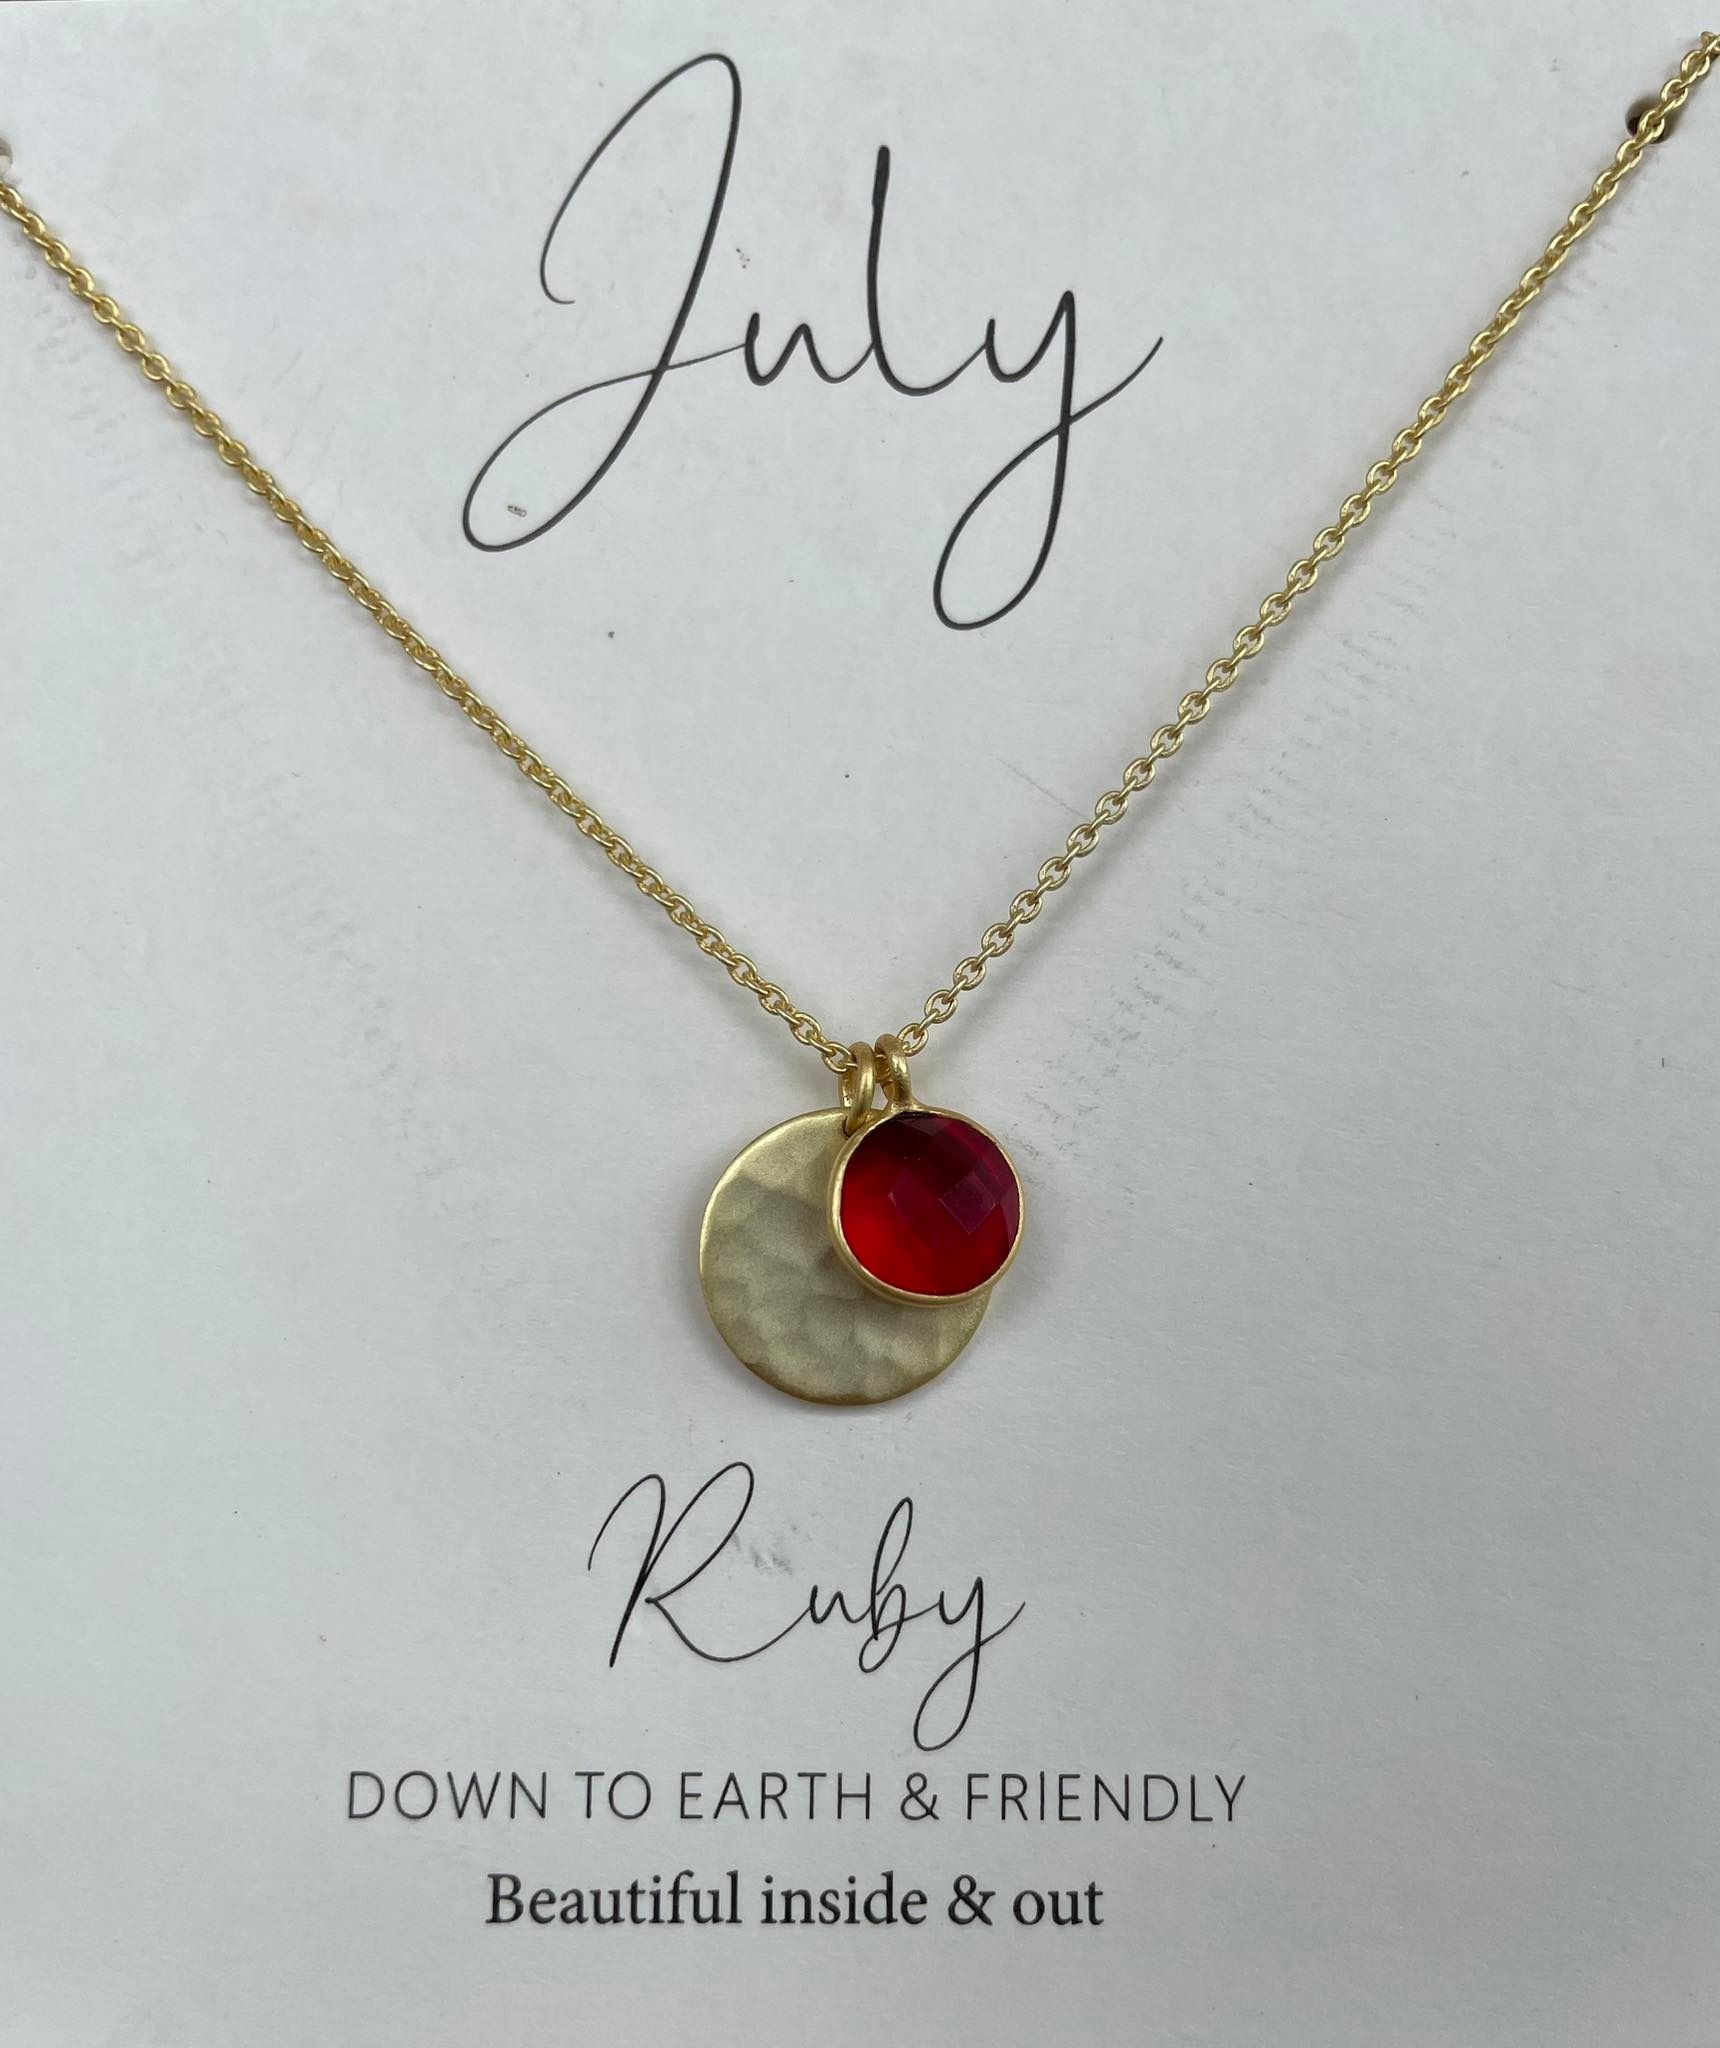 5. Humidity Birthstone Necklace July